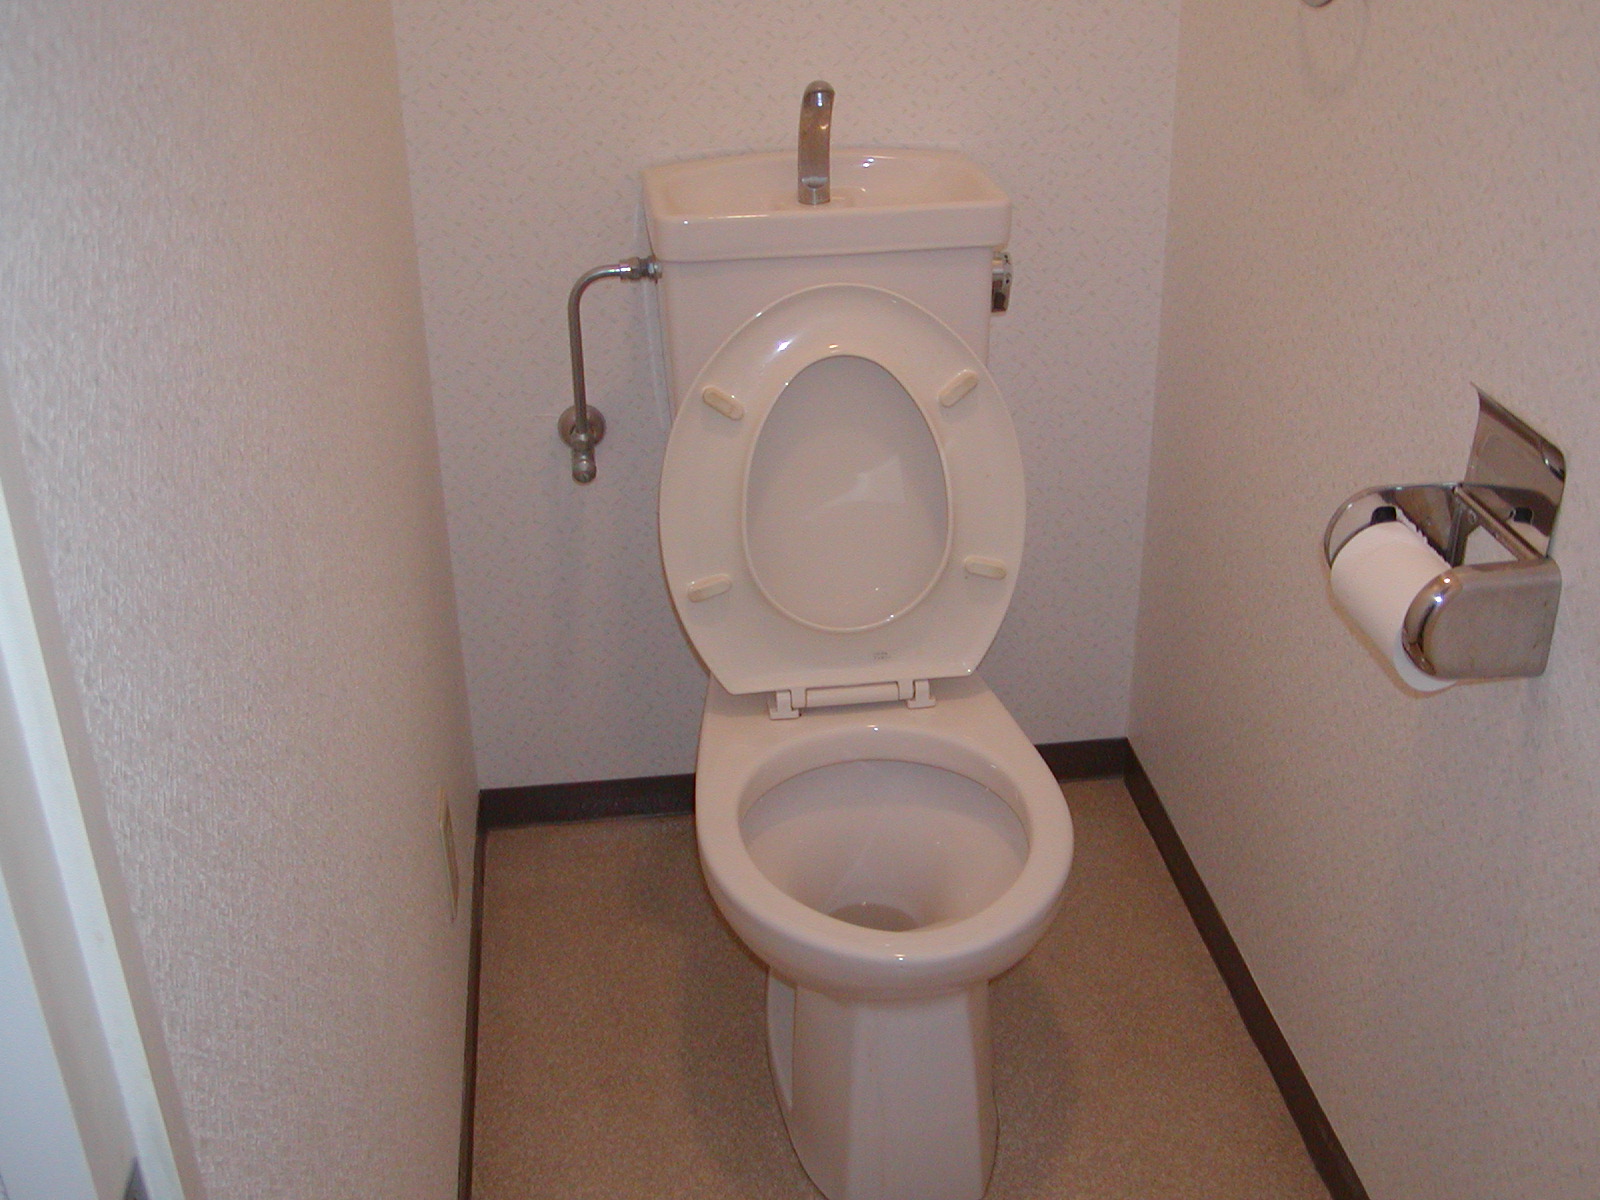 Toilet. If the Company, Ponta point for free at the time of conclusion of a contract